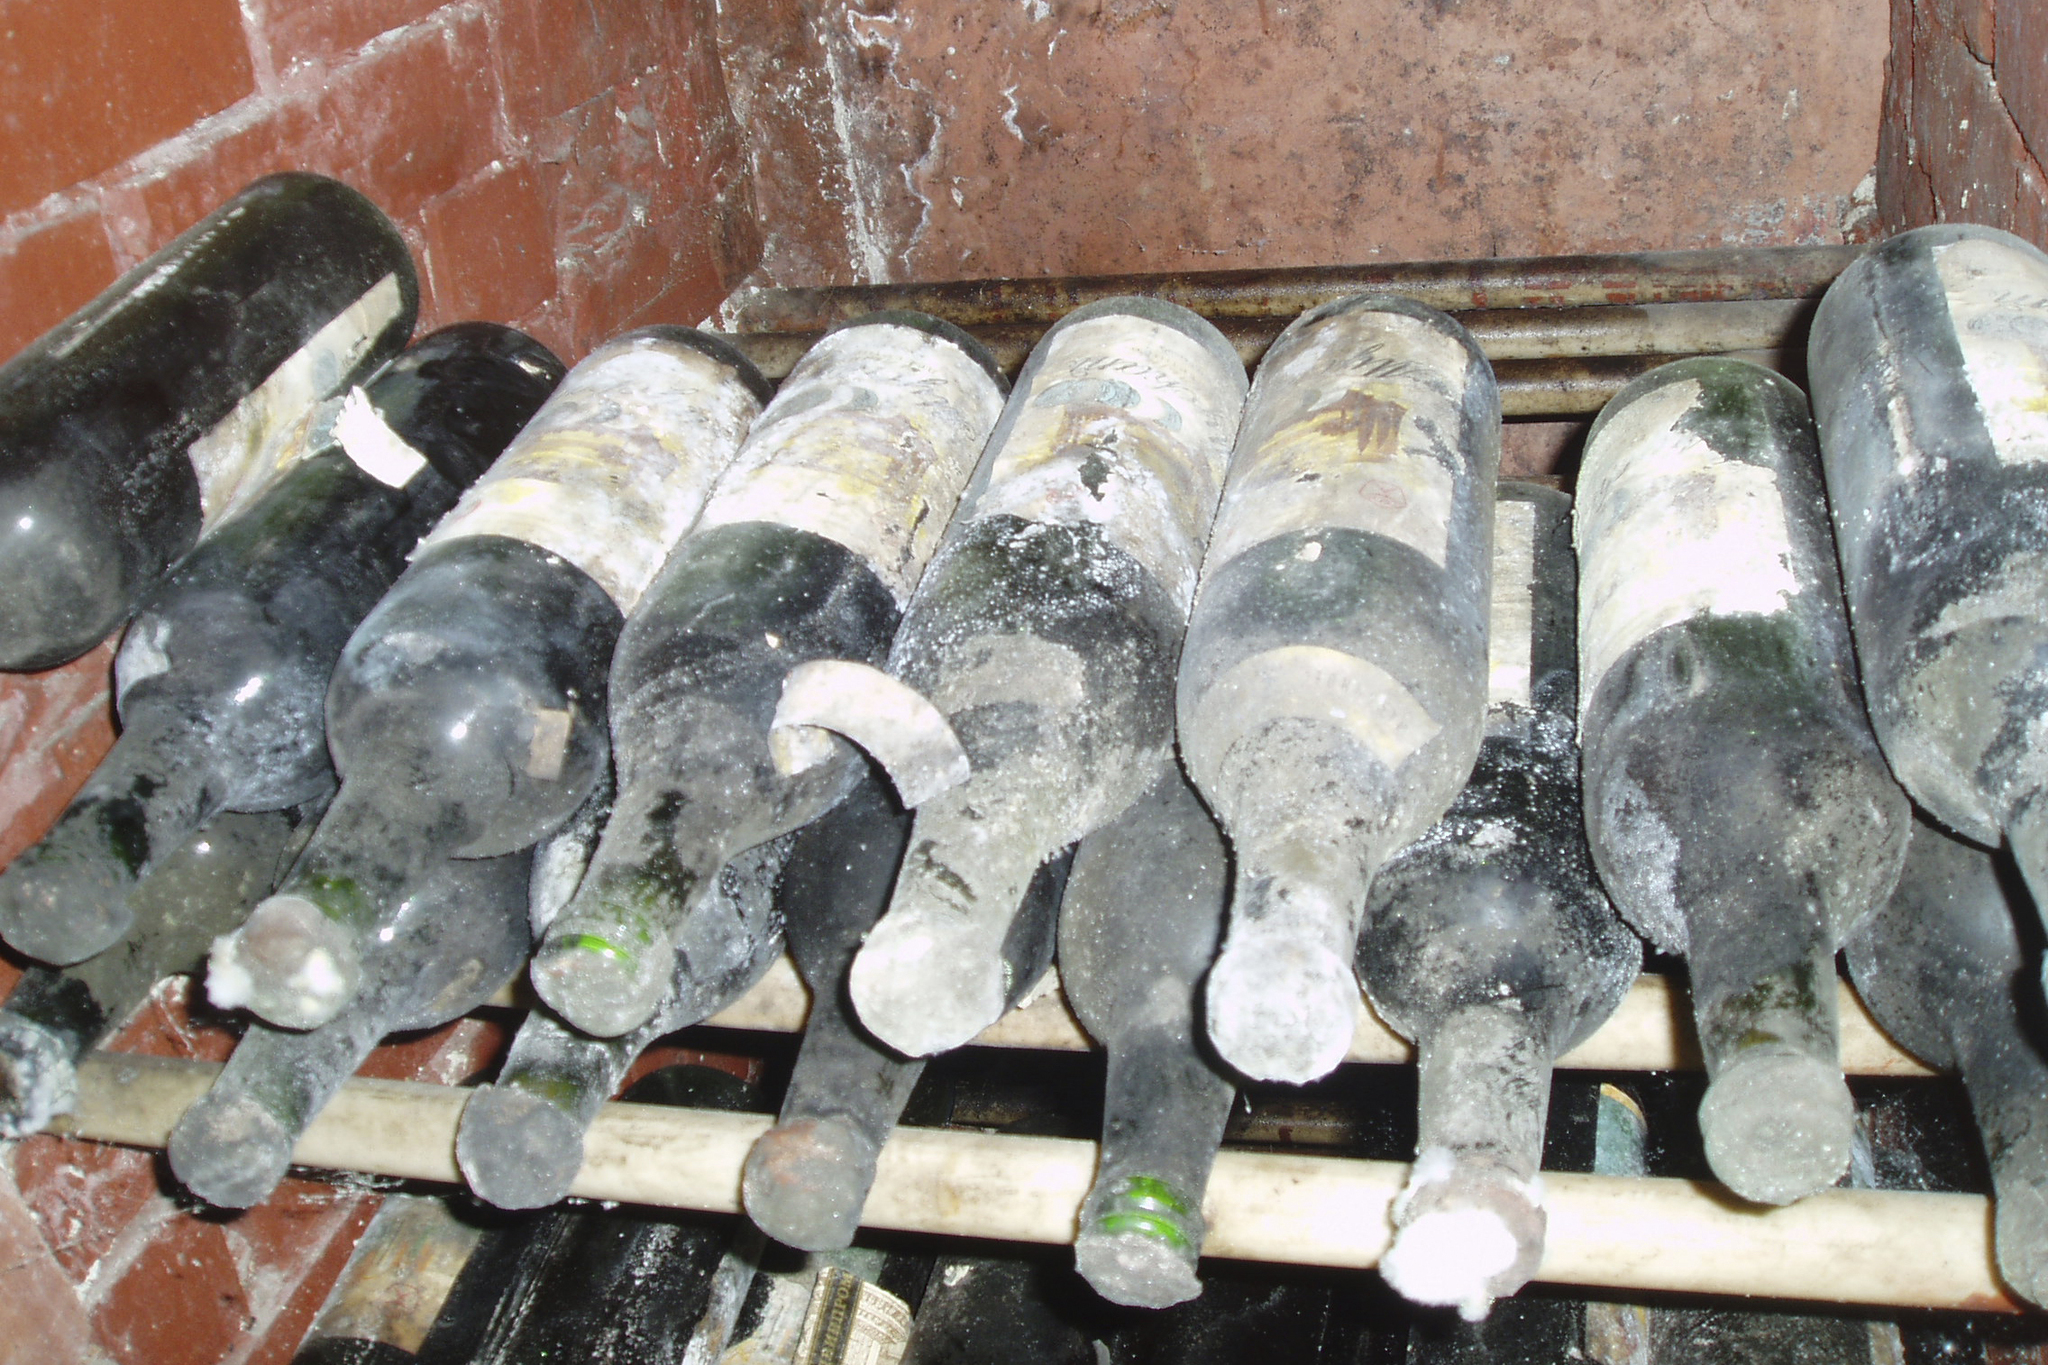 Vintage wine from the cellars of Cojuşna winery in Moldova. Photo by Guttorm Flatabo/Flickr